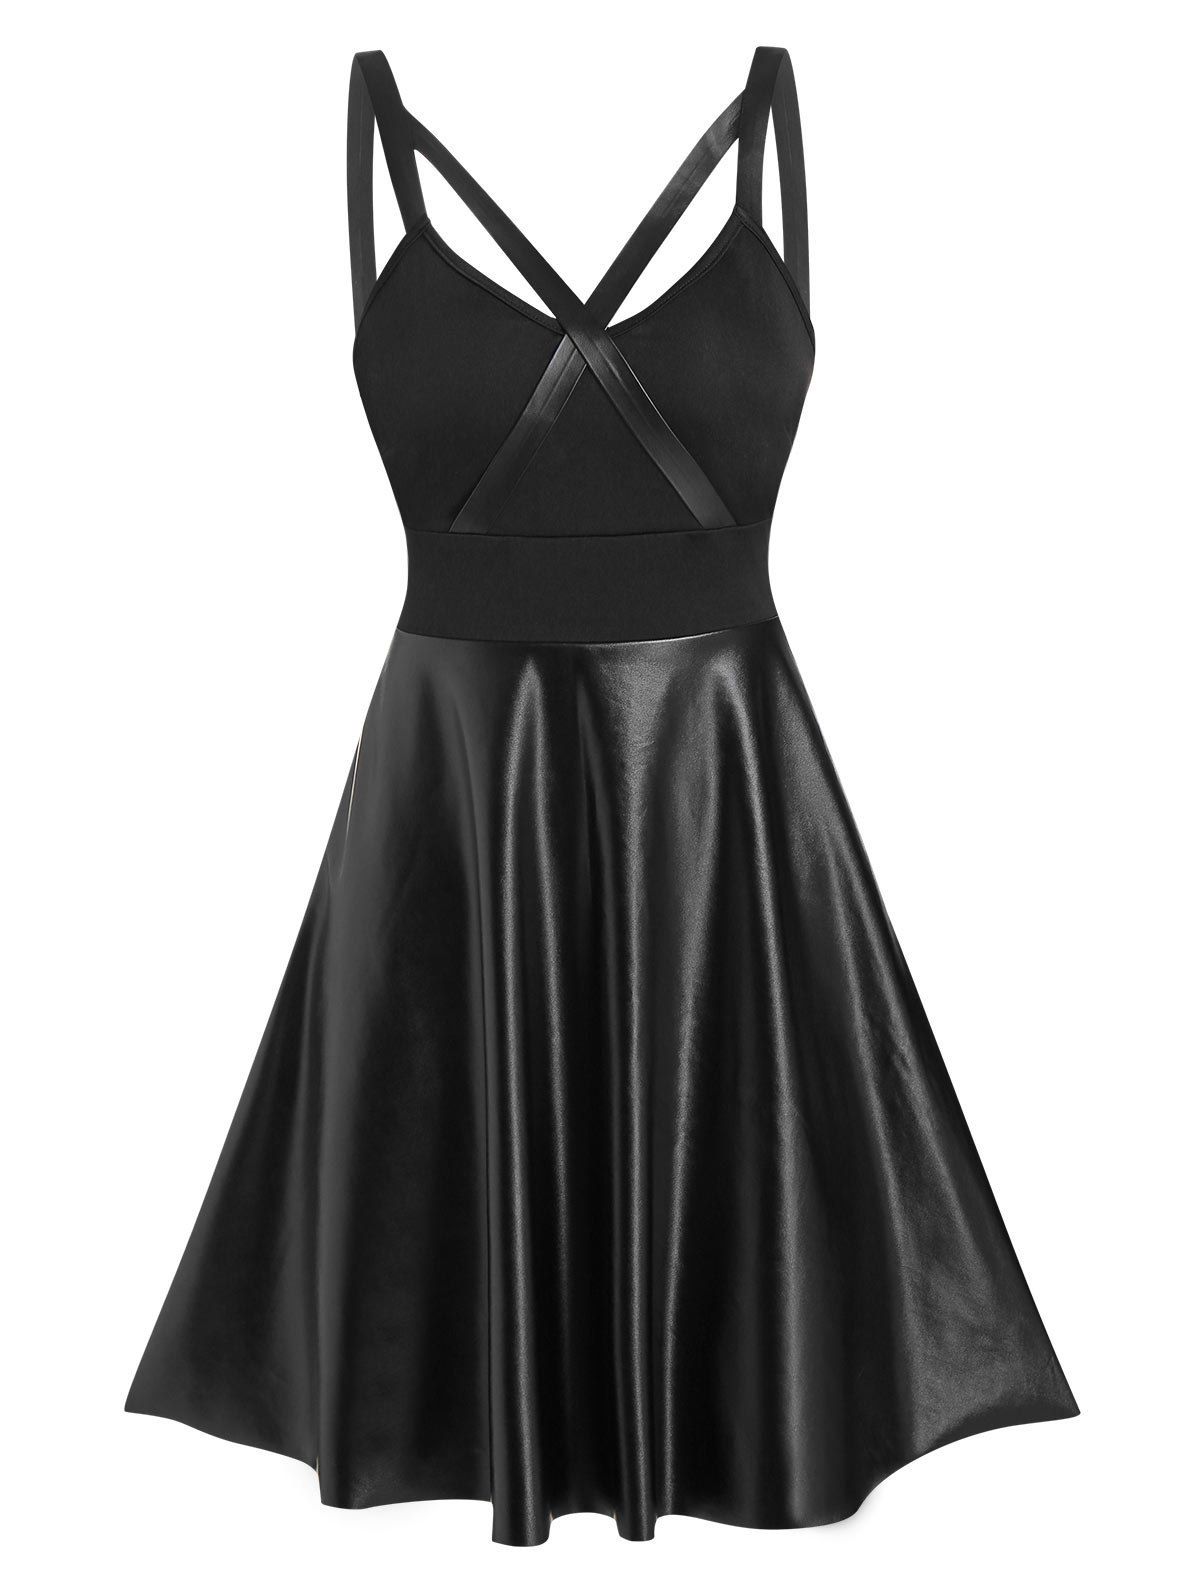 [25% OFF] 2021 Sleeveless Criss-cross Faux Leather Dress In BLACK ...